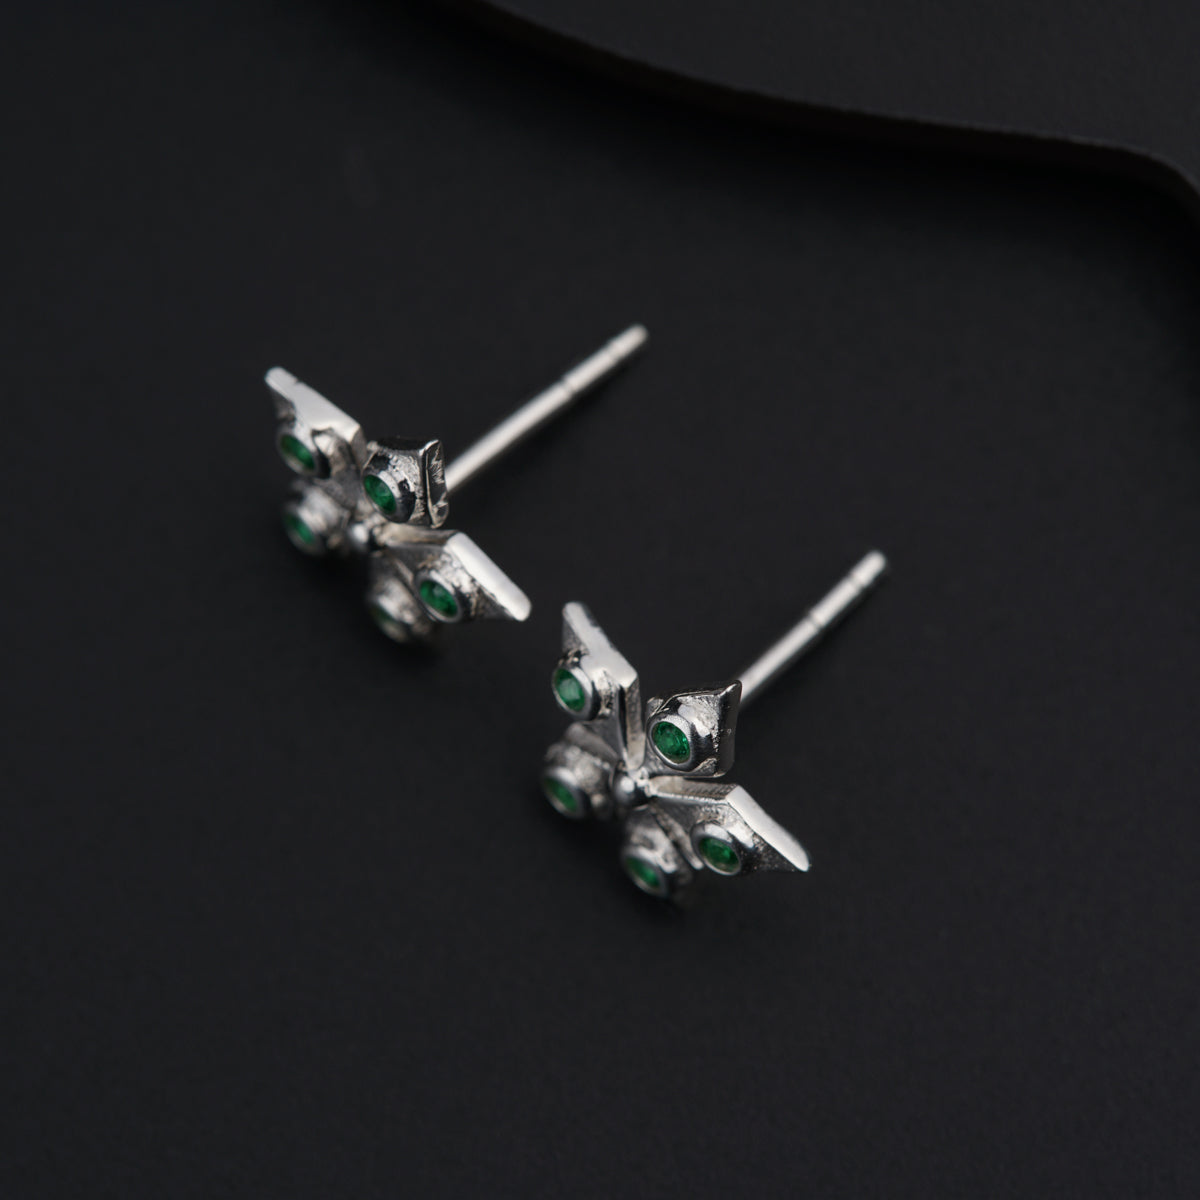 a pair of silver and green earrings on a black surface